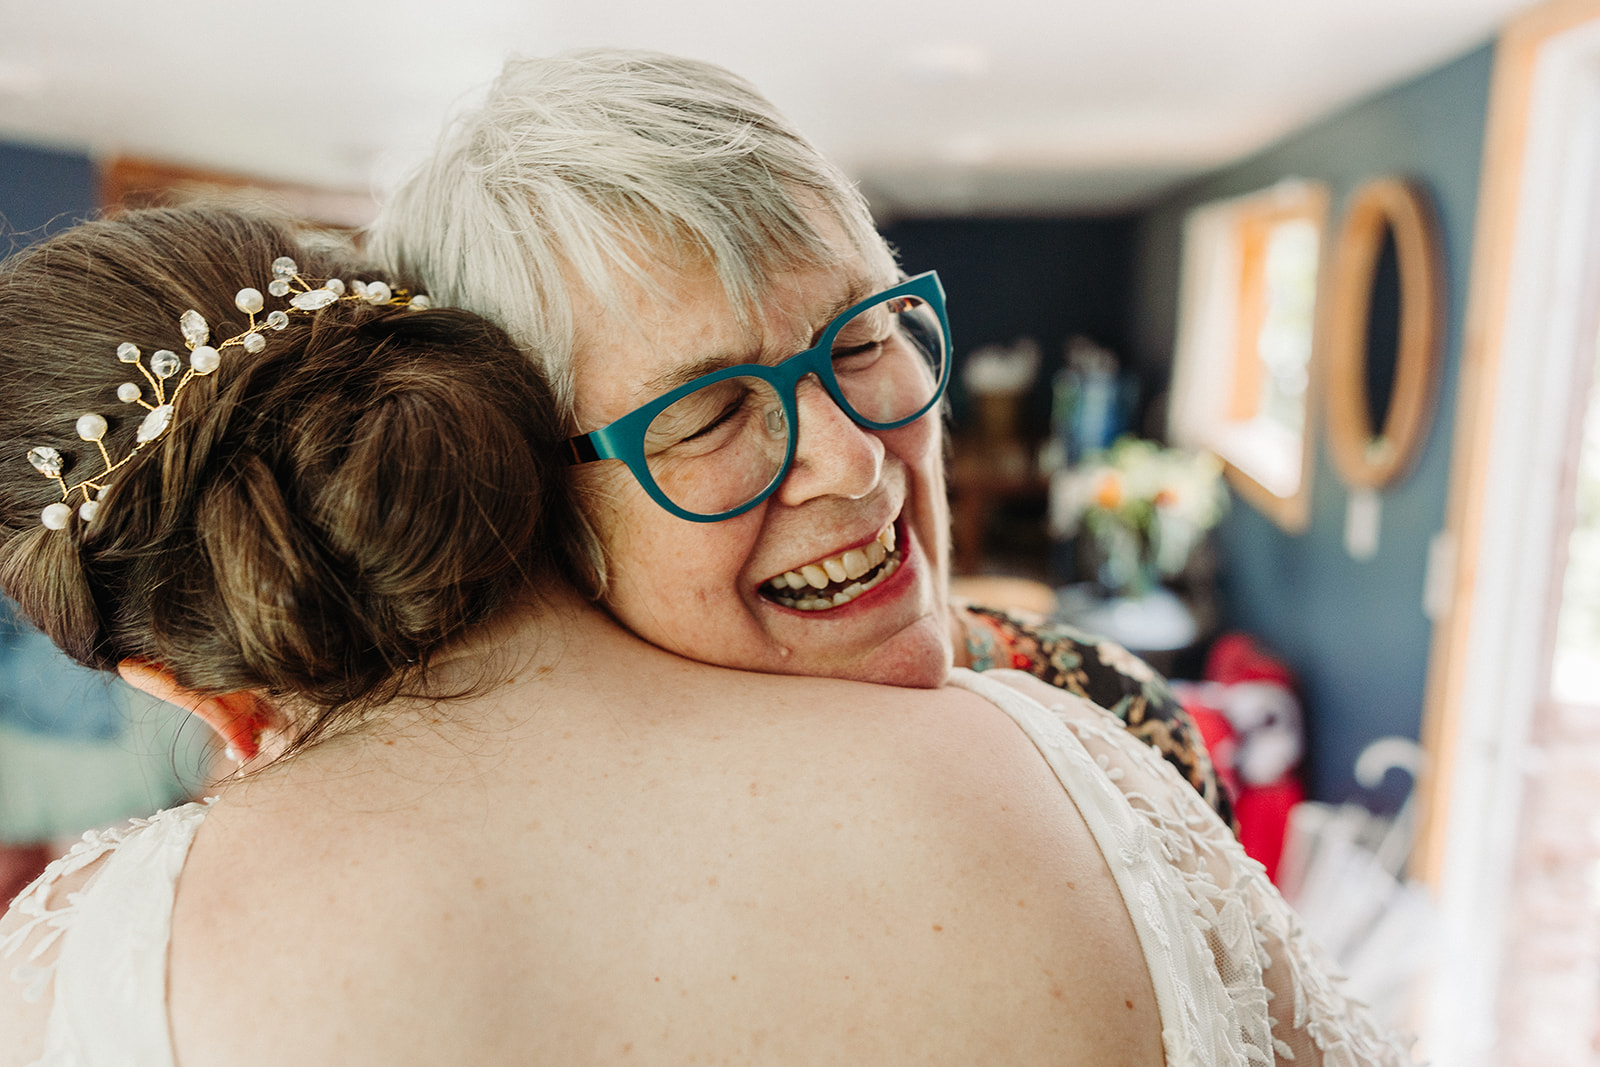 An emotional hug between the bride and her mother, the mom smiling and resting her head on her daughters shoulder.